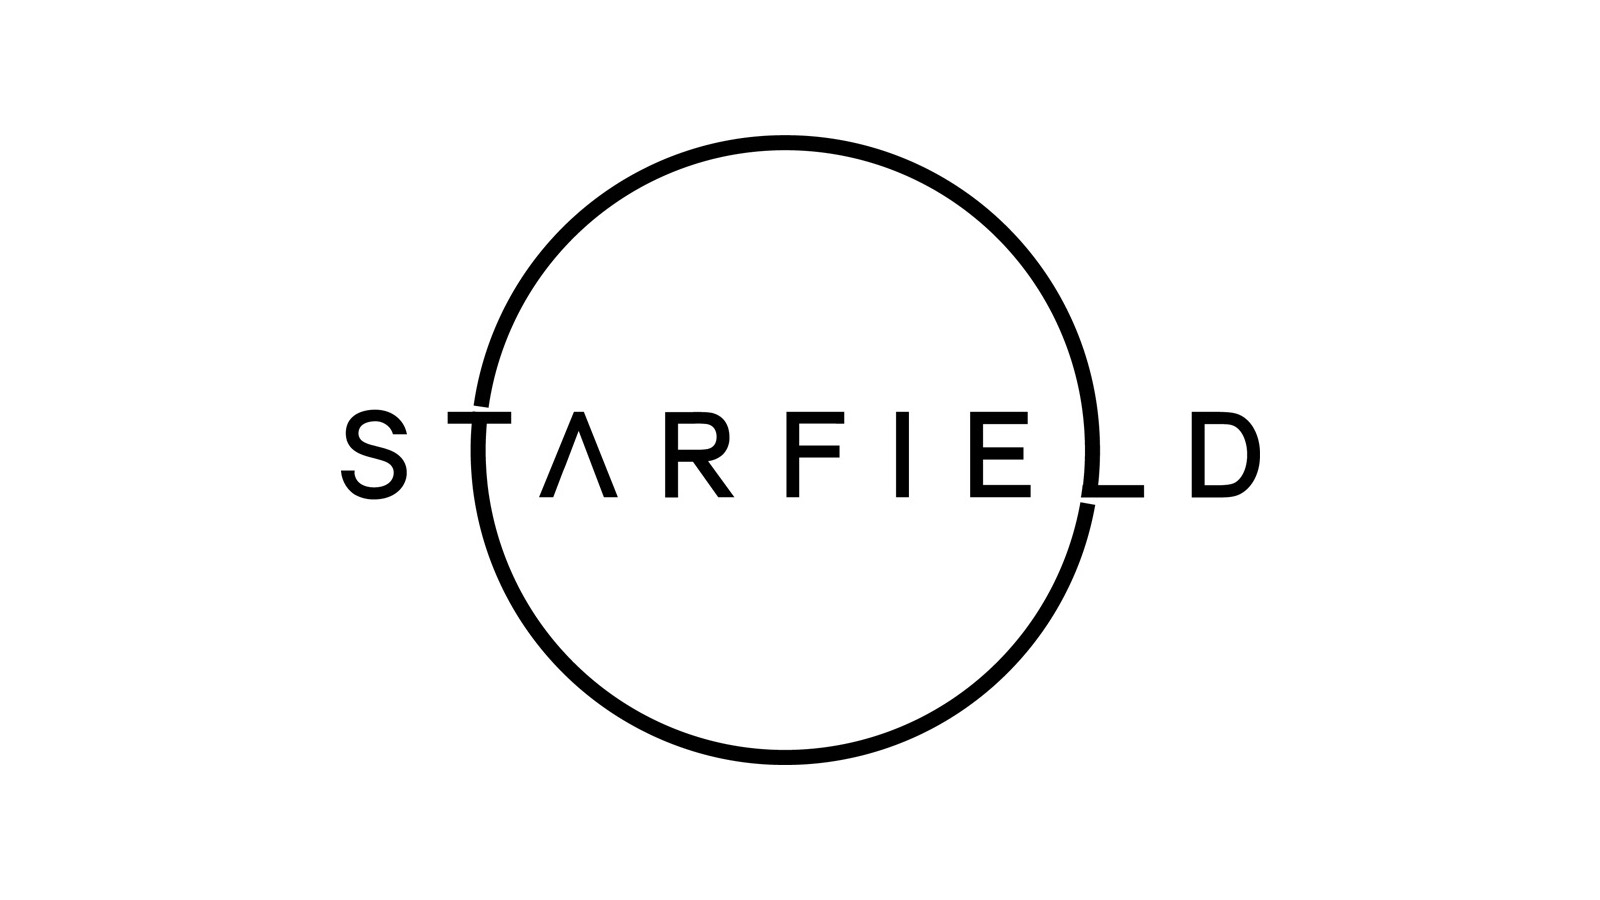 Bethesda has been responding to negative Starfield reviews on